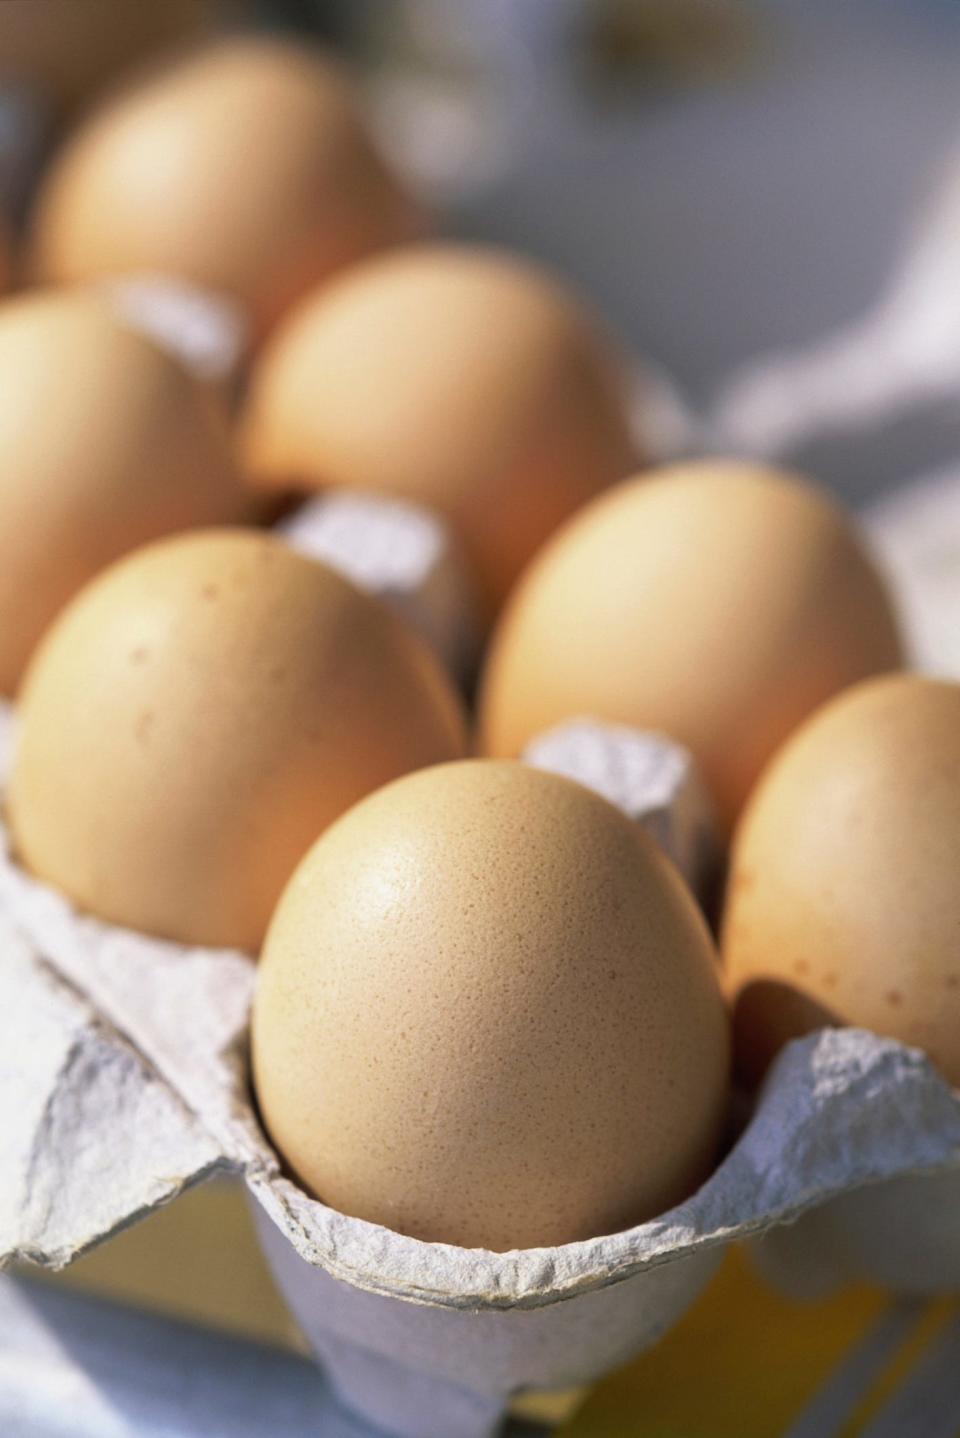 According to officials, eggs remain safe to eat when cooked and stored properly.